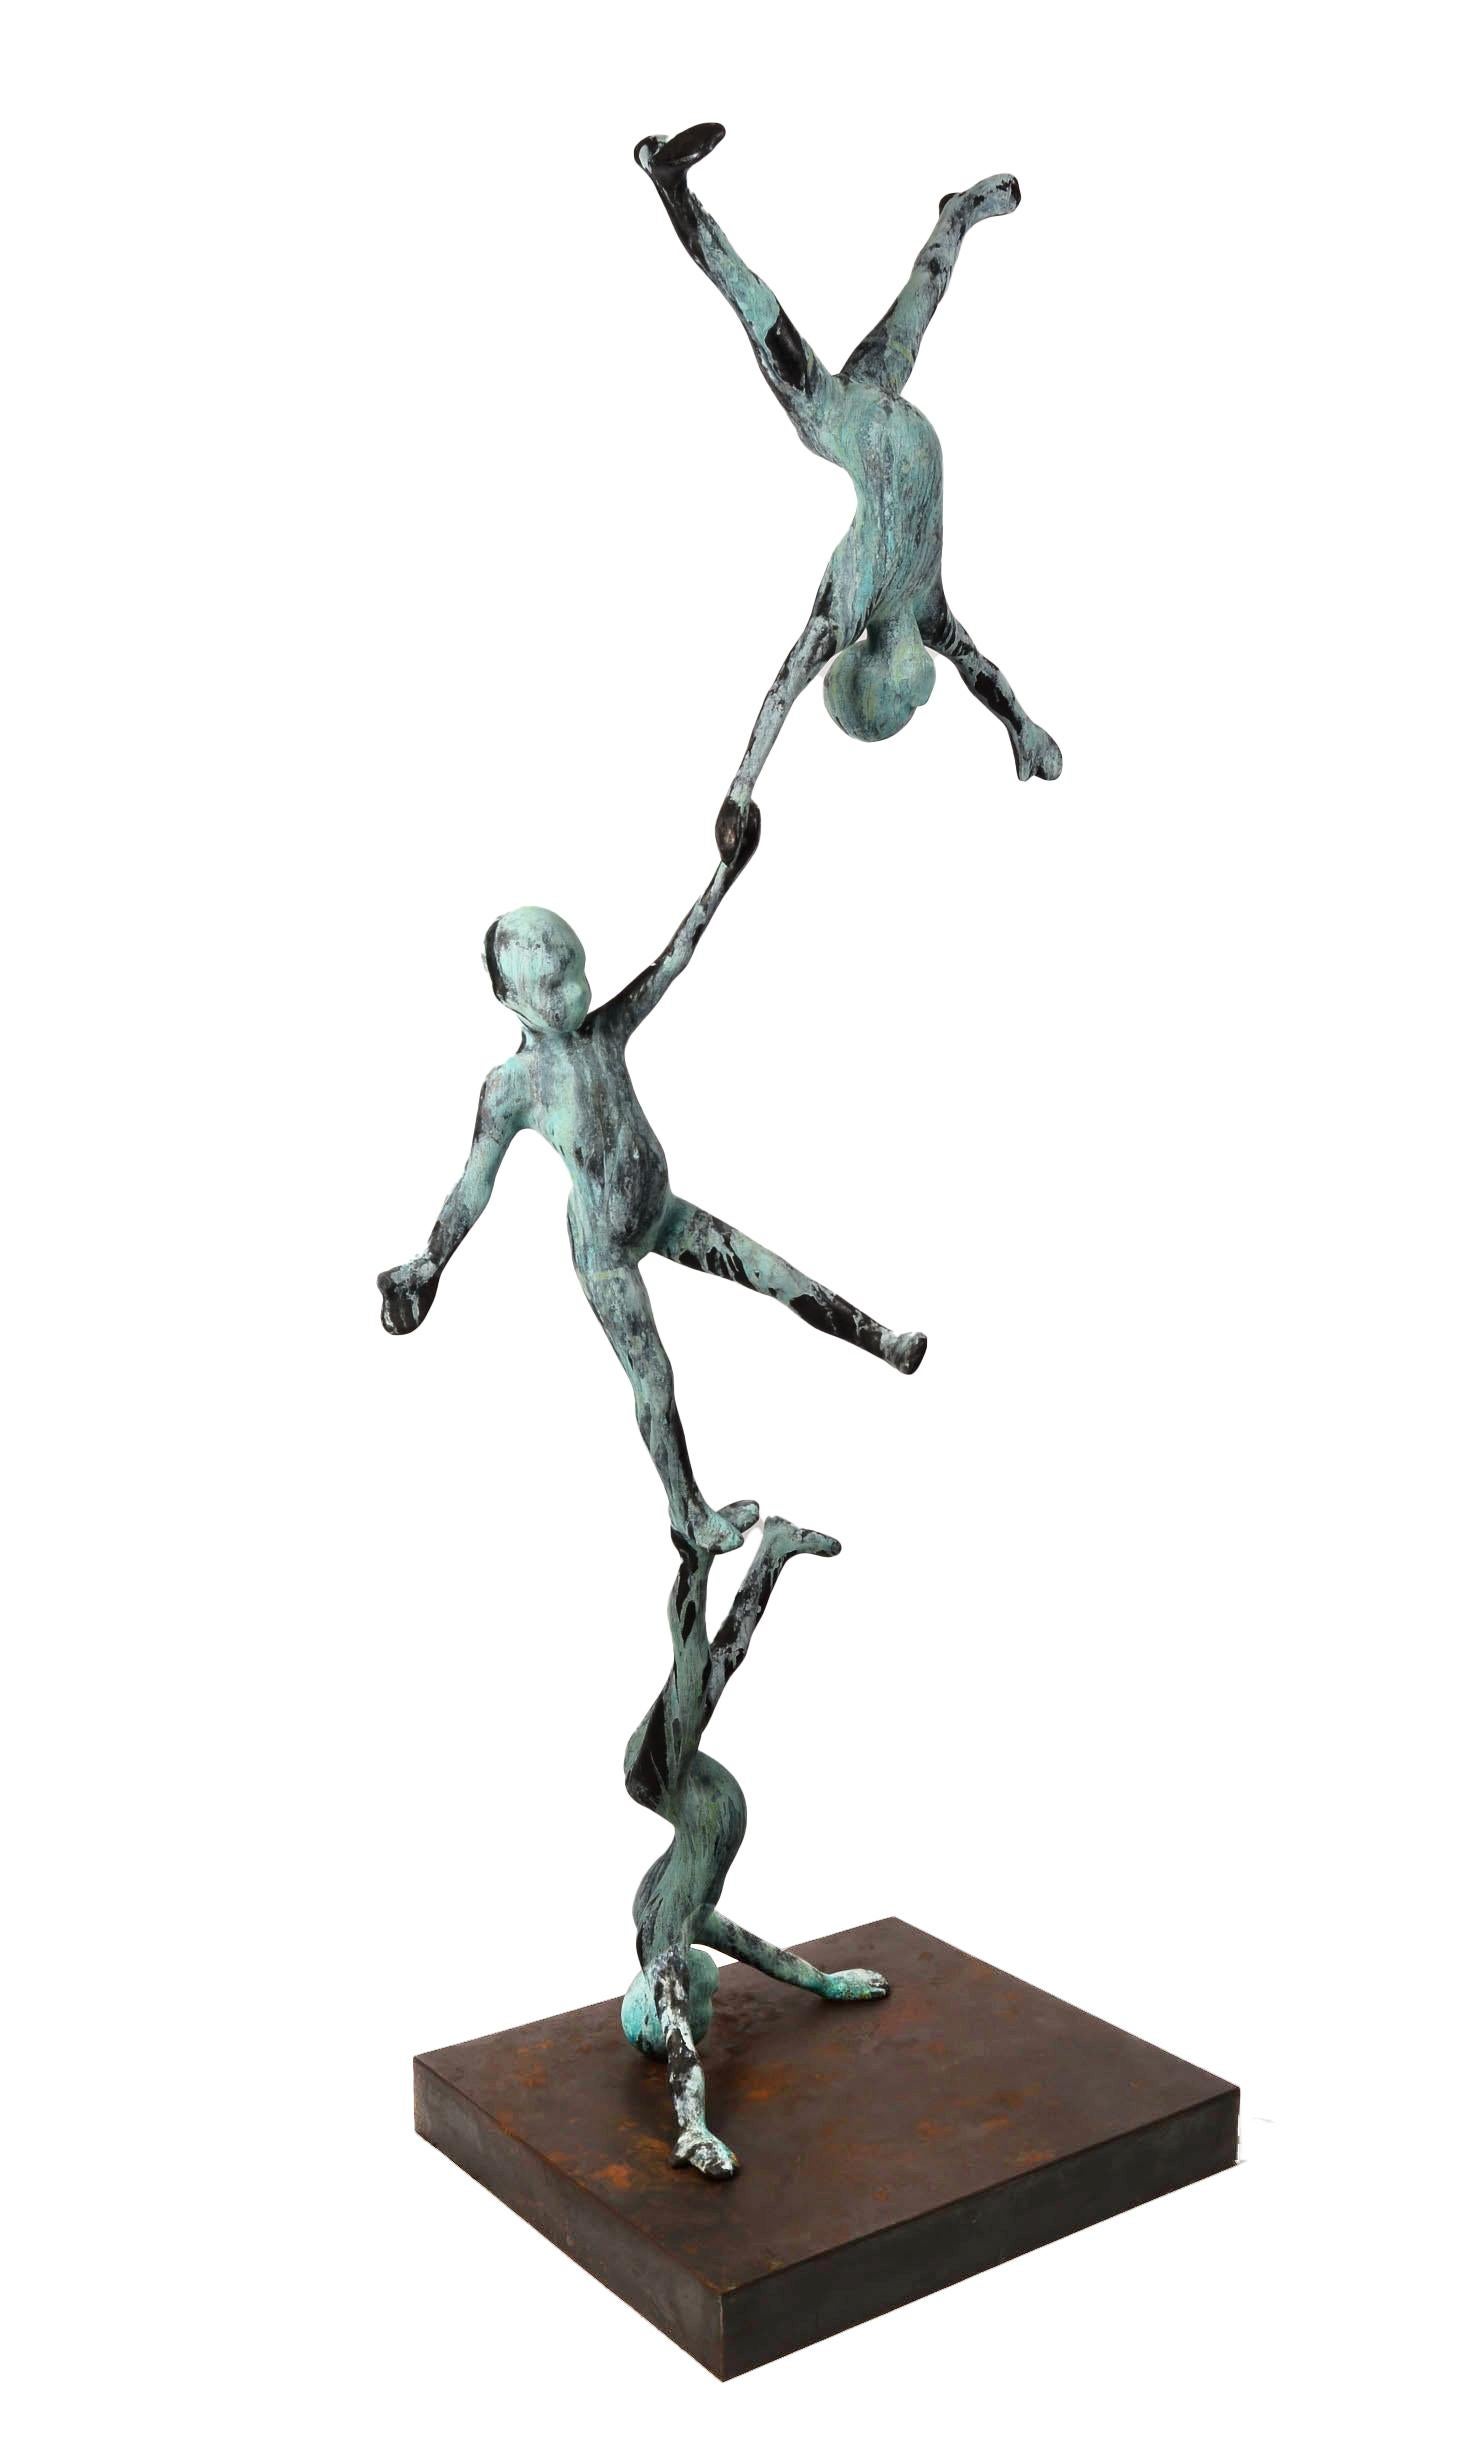 This monumental bronze sculpture by Jesús Curiá features three youthful acrobats in a feat of coordination and balance.  The composition of stacked figures appear playful and innocent.  A beautiful vert-de-gris patina drips down the figures further